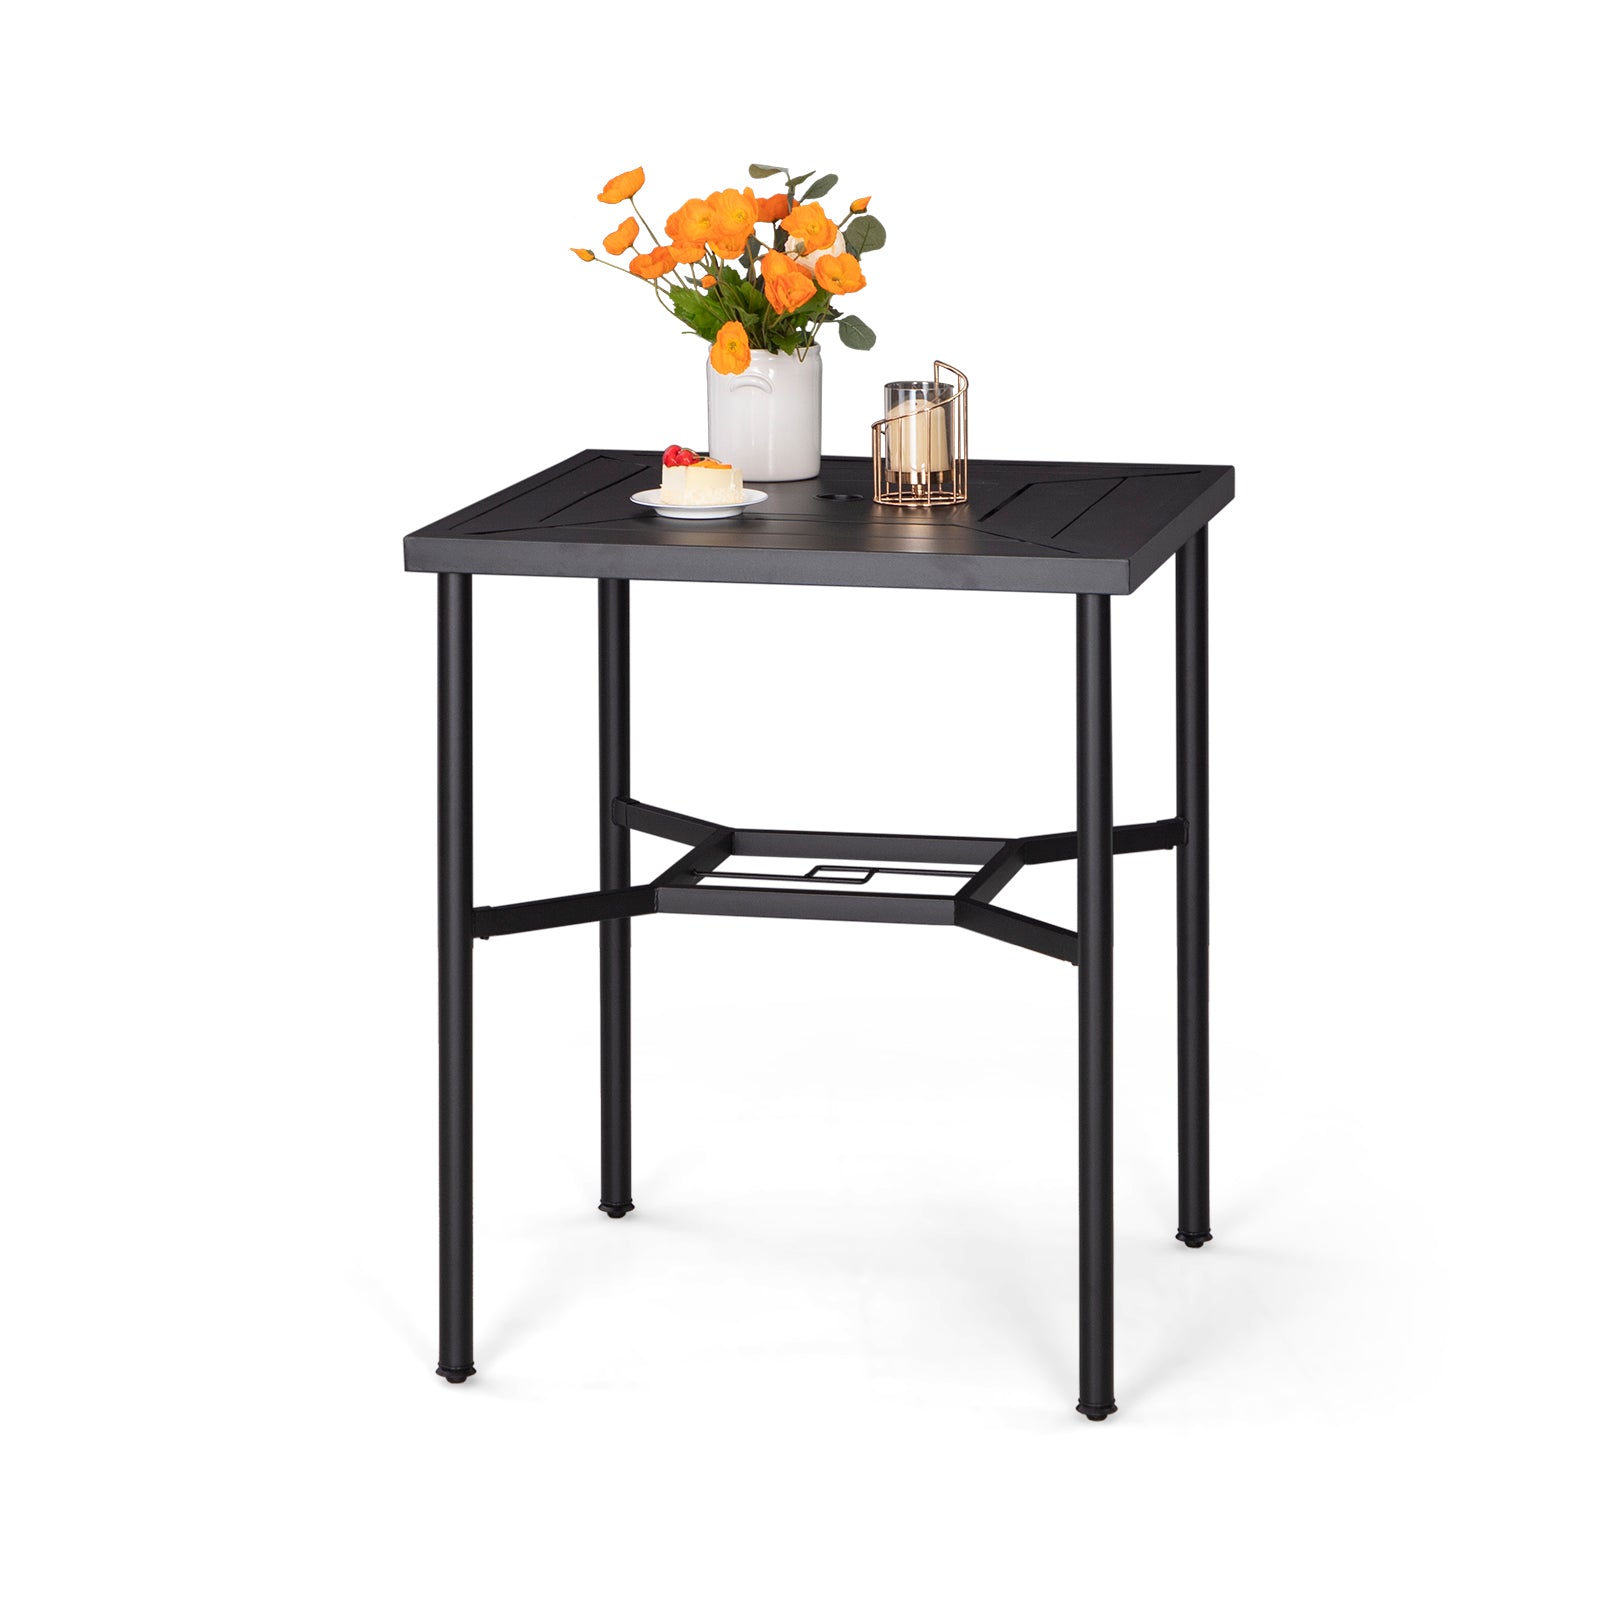 PHI VILLA Patio 32" Geometrically-stamped Steel Square Bar Dining Table